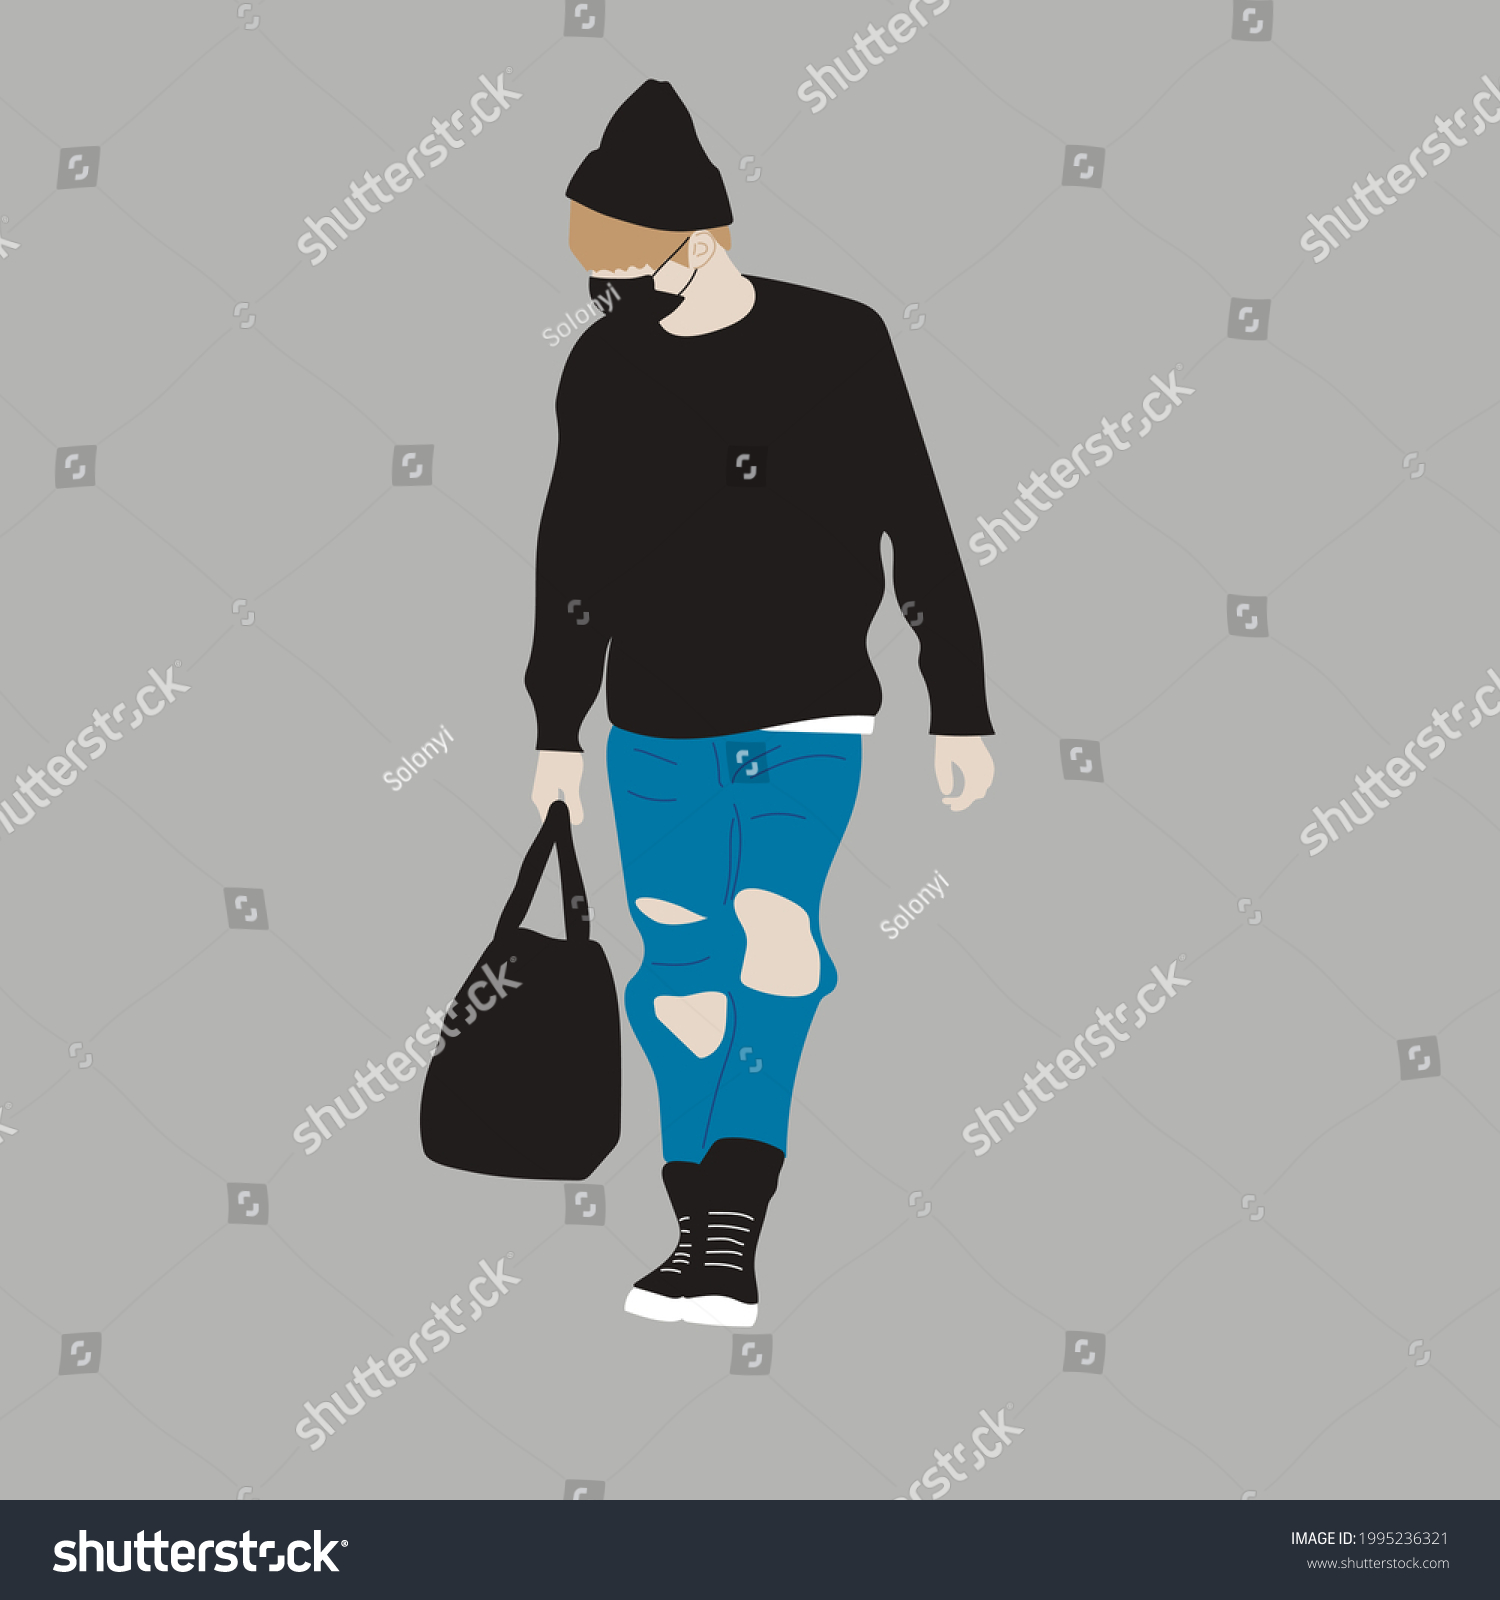 SVG of Vector illustration of Kpop street fashion. Street idols of Koreans. Kpop men's fashion idol. A guy in blue jeans and a black sweatshirt and with a bag and a mask on his face. svg